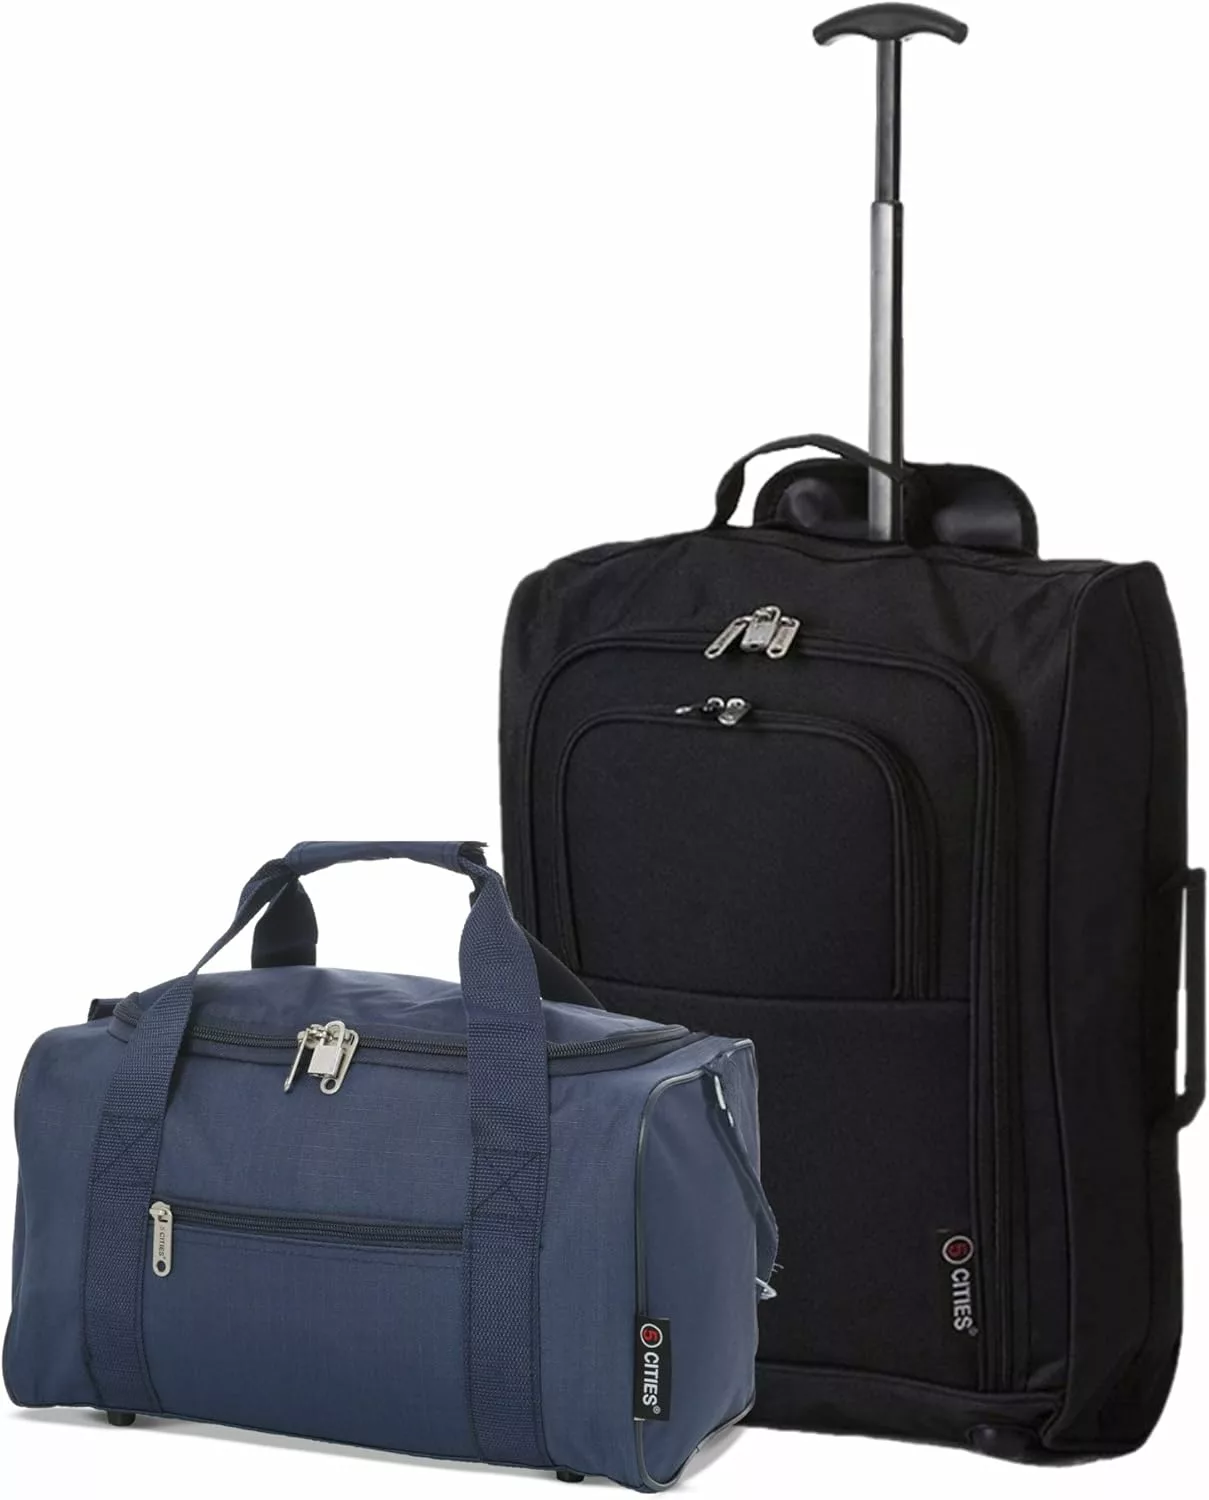 5 Cities Set of 2 Hand Luggage Set Including Ryanair Cabin Approved 21"/55cm Trolley Bag & 40x20x25 Ryanair Maximum Holdall Under Seat Flight Bag